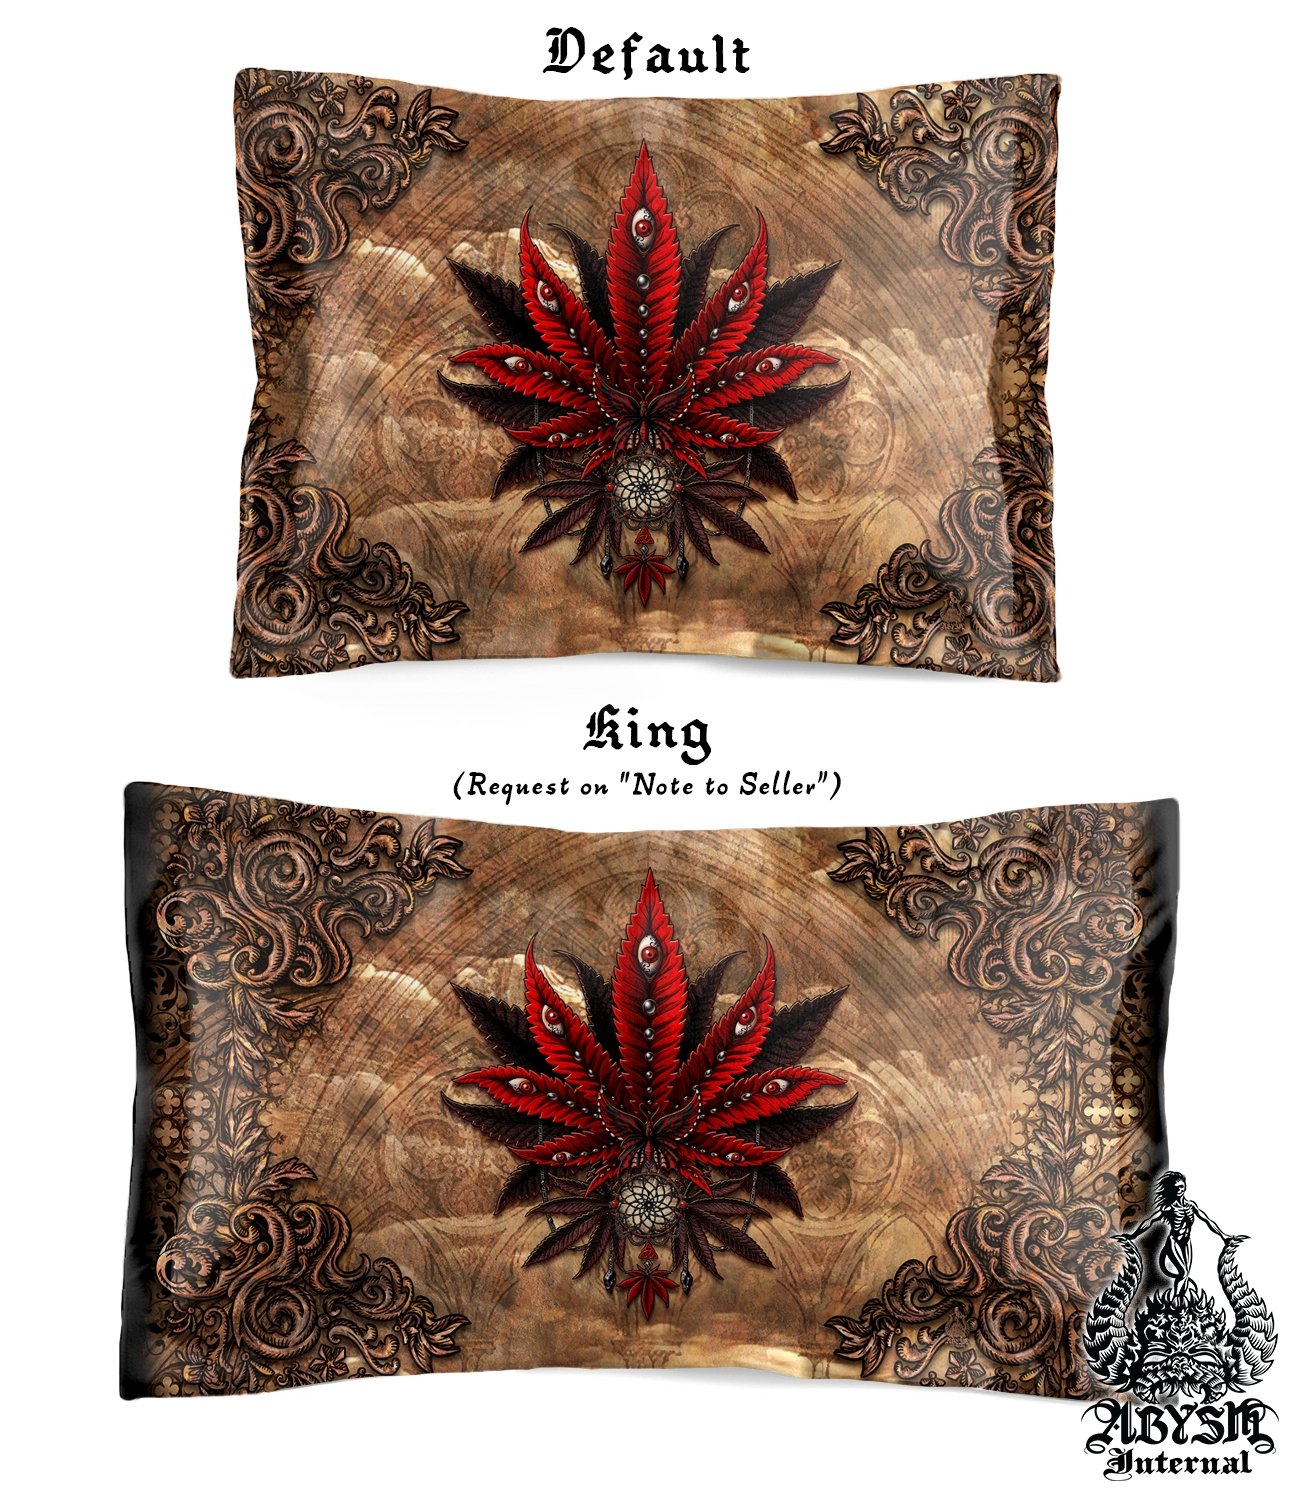 Gothic Weed Bedding Set, Comforter and Duvet, Cannabis Bed Cover, Marijuana Bedroom Decor, King, Queen and Twin Size, 420 Room Art - Horror Beige - Abysm Internal